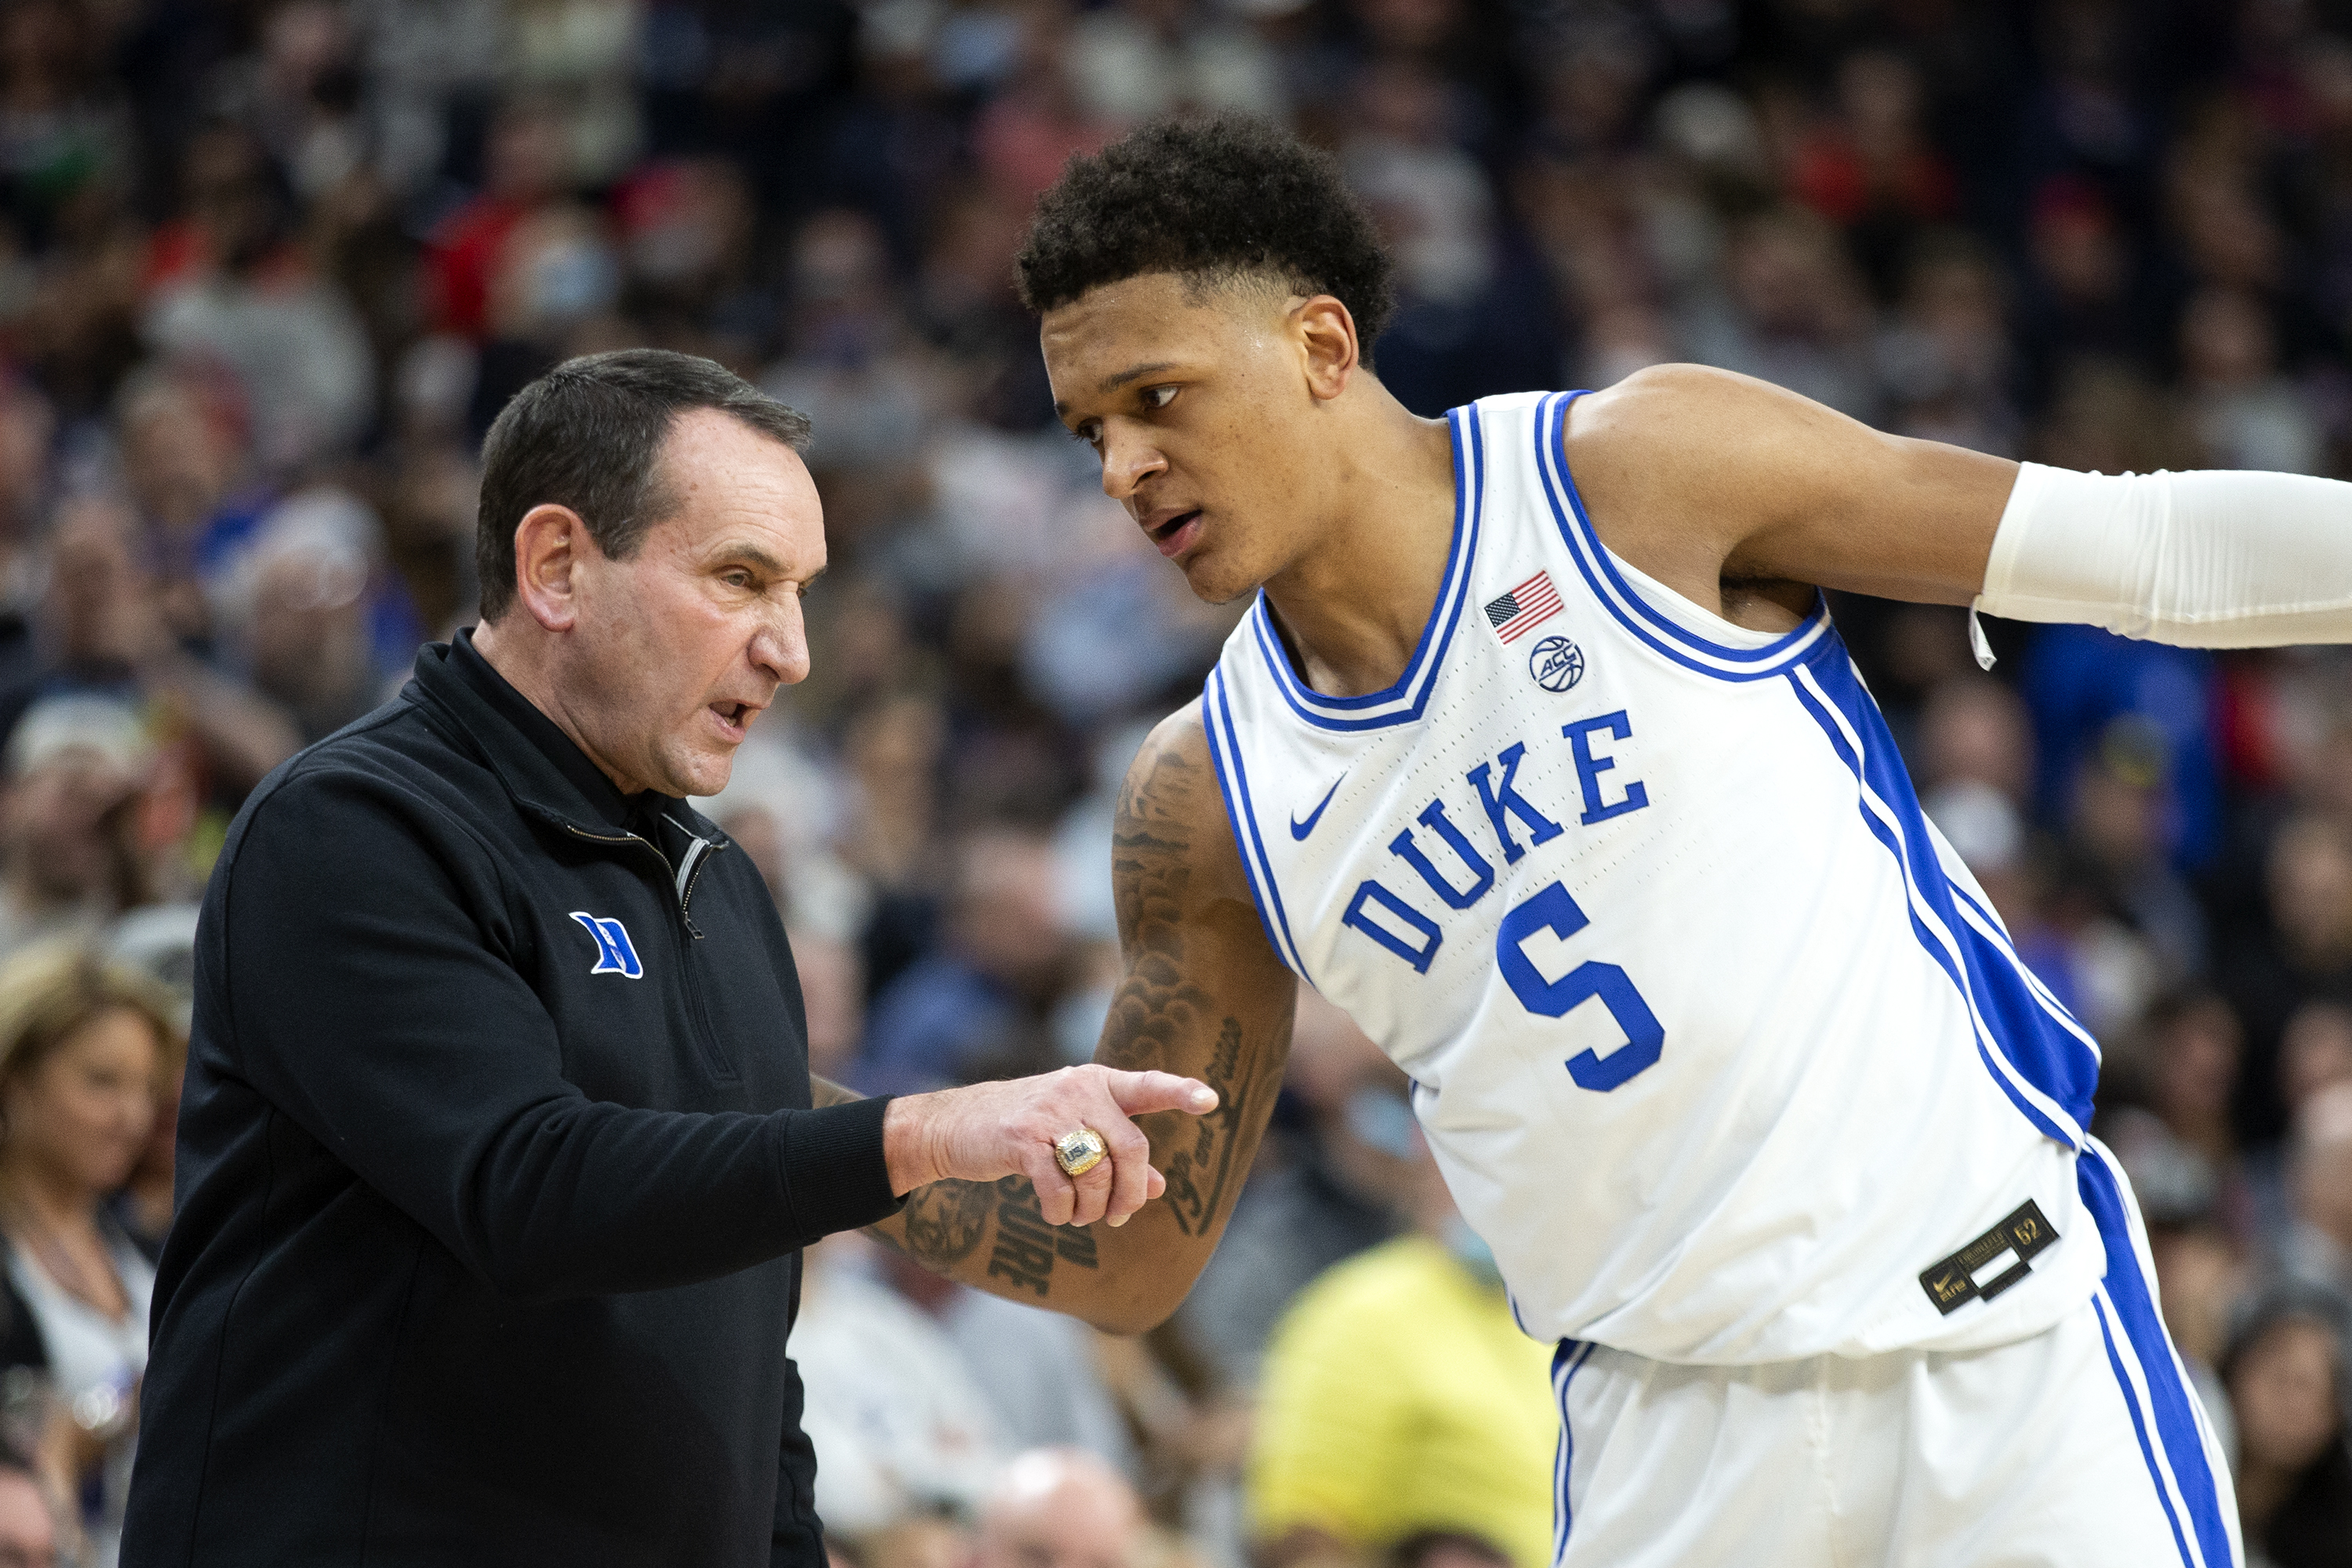 Duke Blue Devils vs North Carolina basketball FREE LIVE STREAM, score, odds, time, TV channel, how to watch NCAA Tournament online (4/2/22)